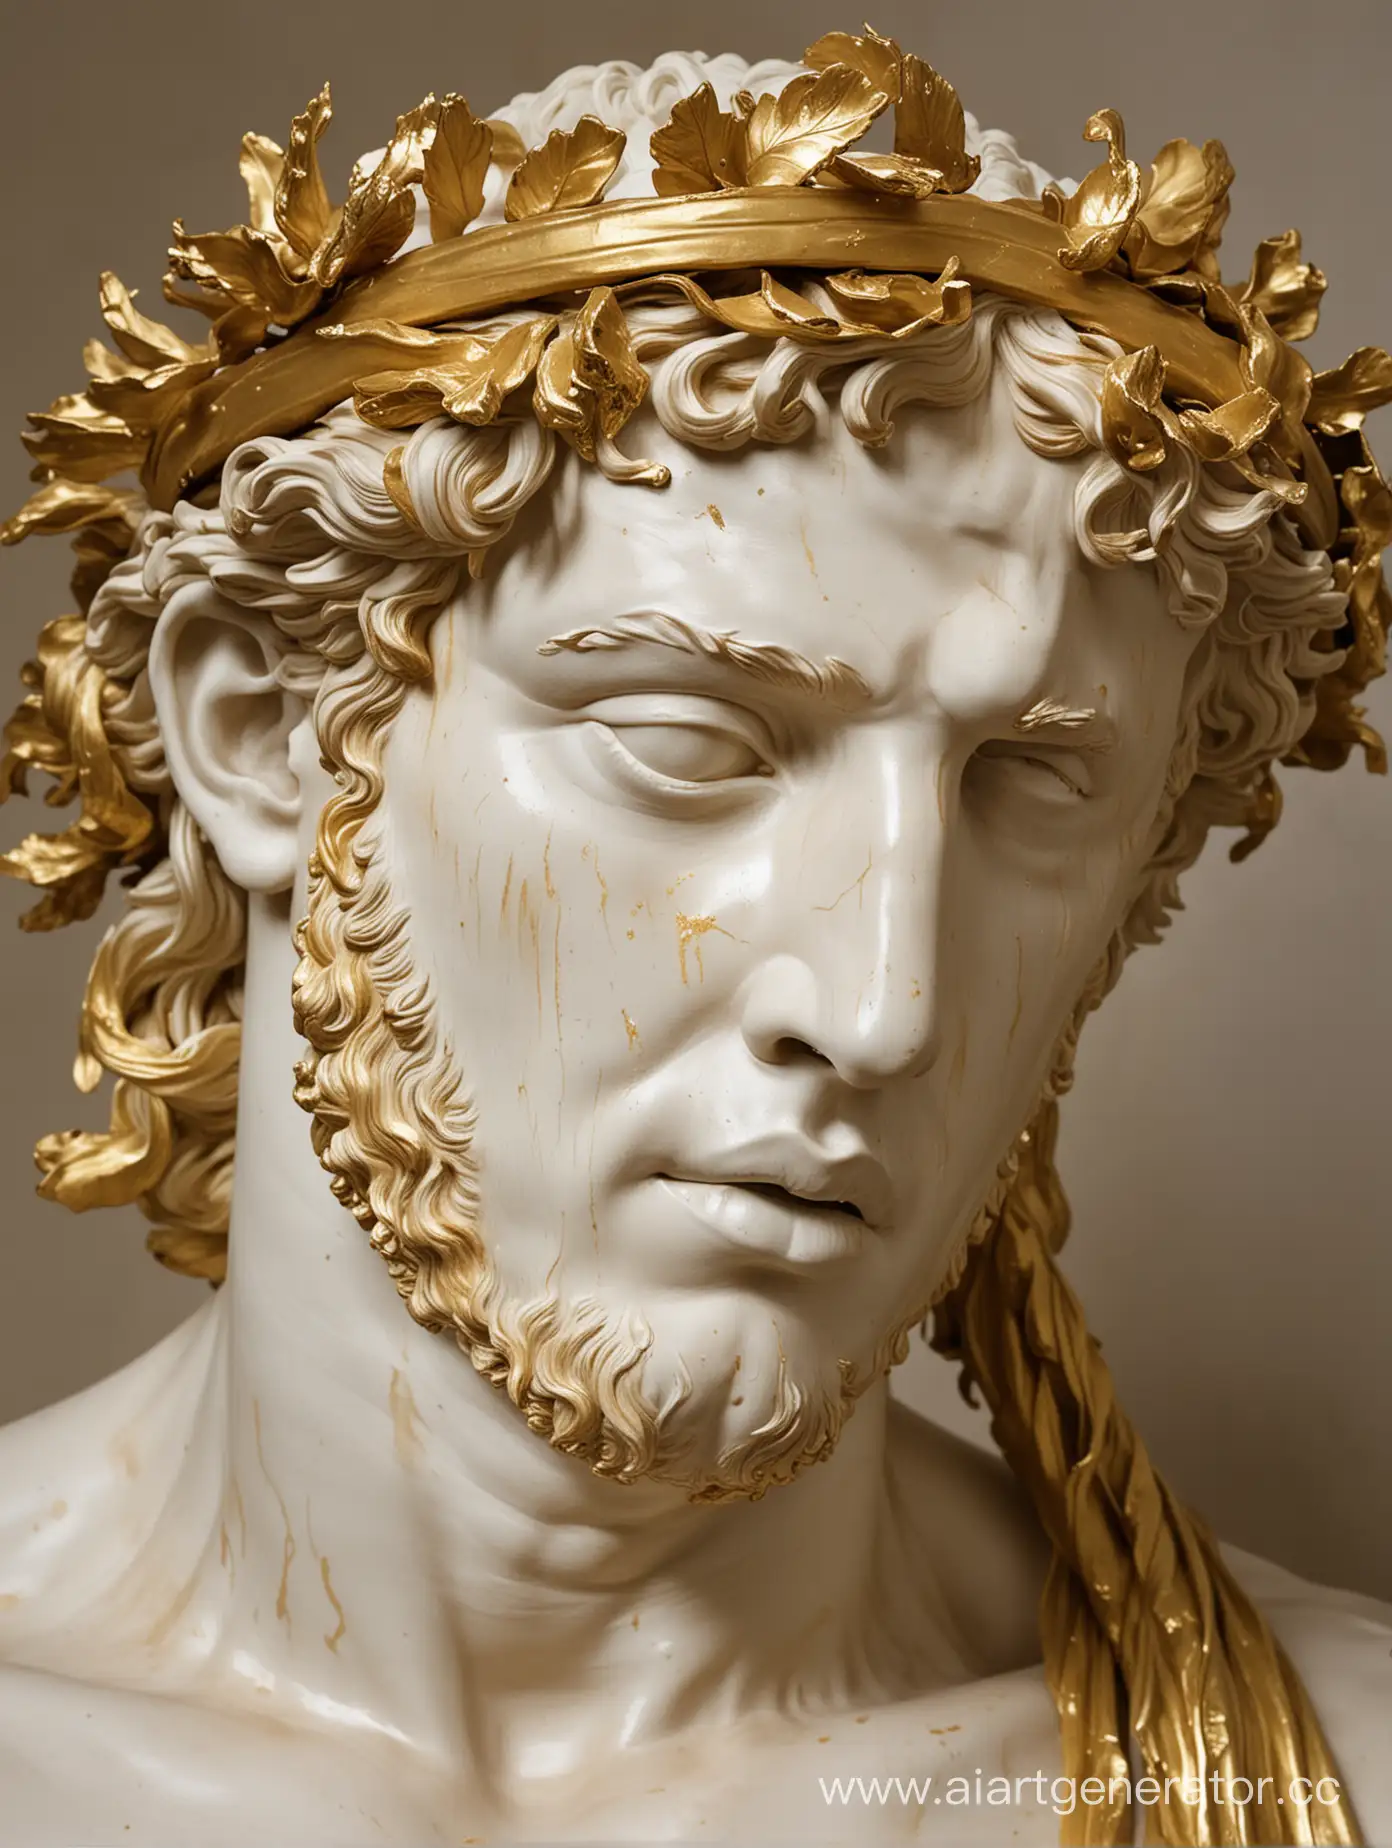 The plaster statue of the head of the young god Dionysus is doused with gold flowing from his hair onto his face.